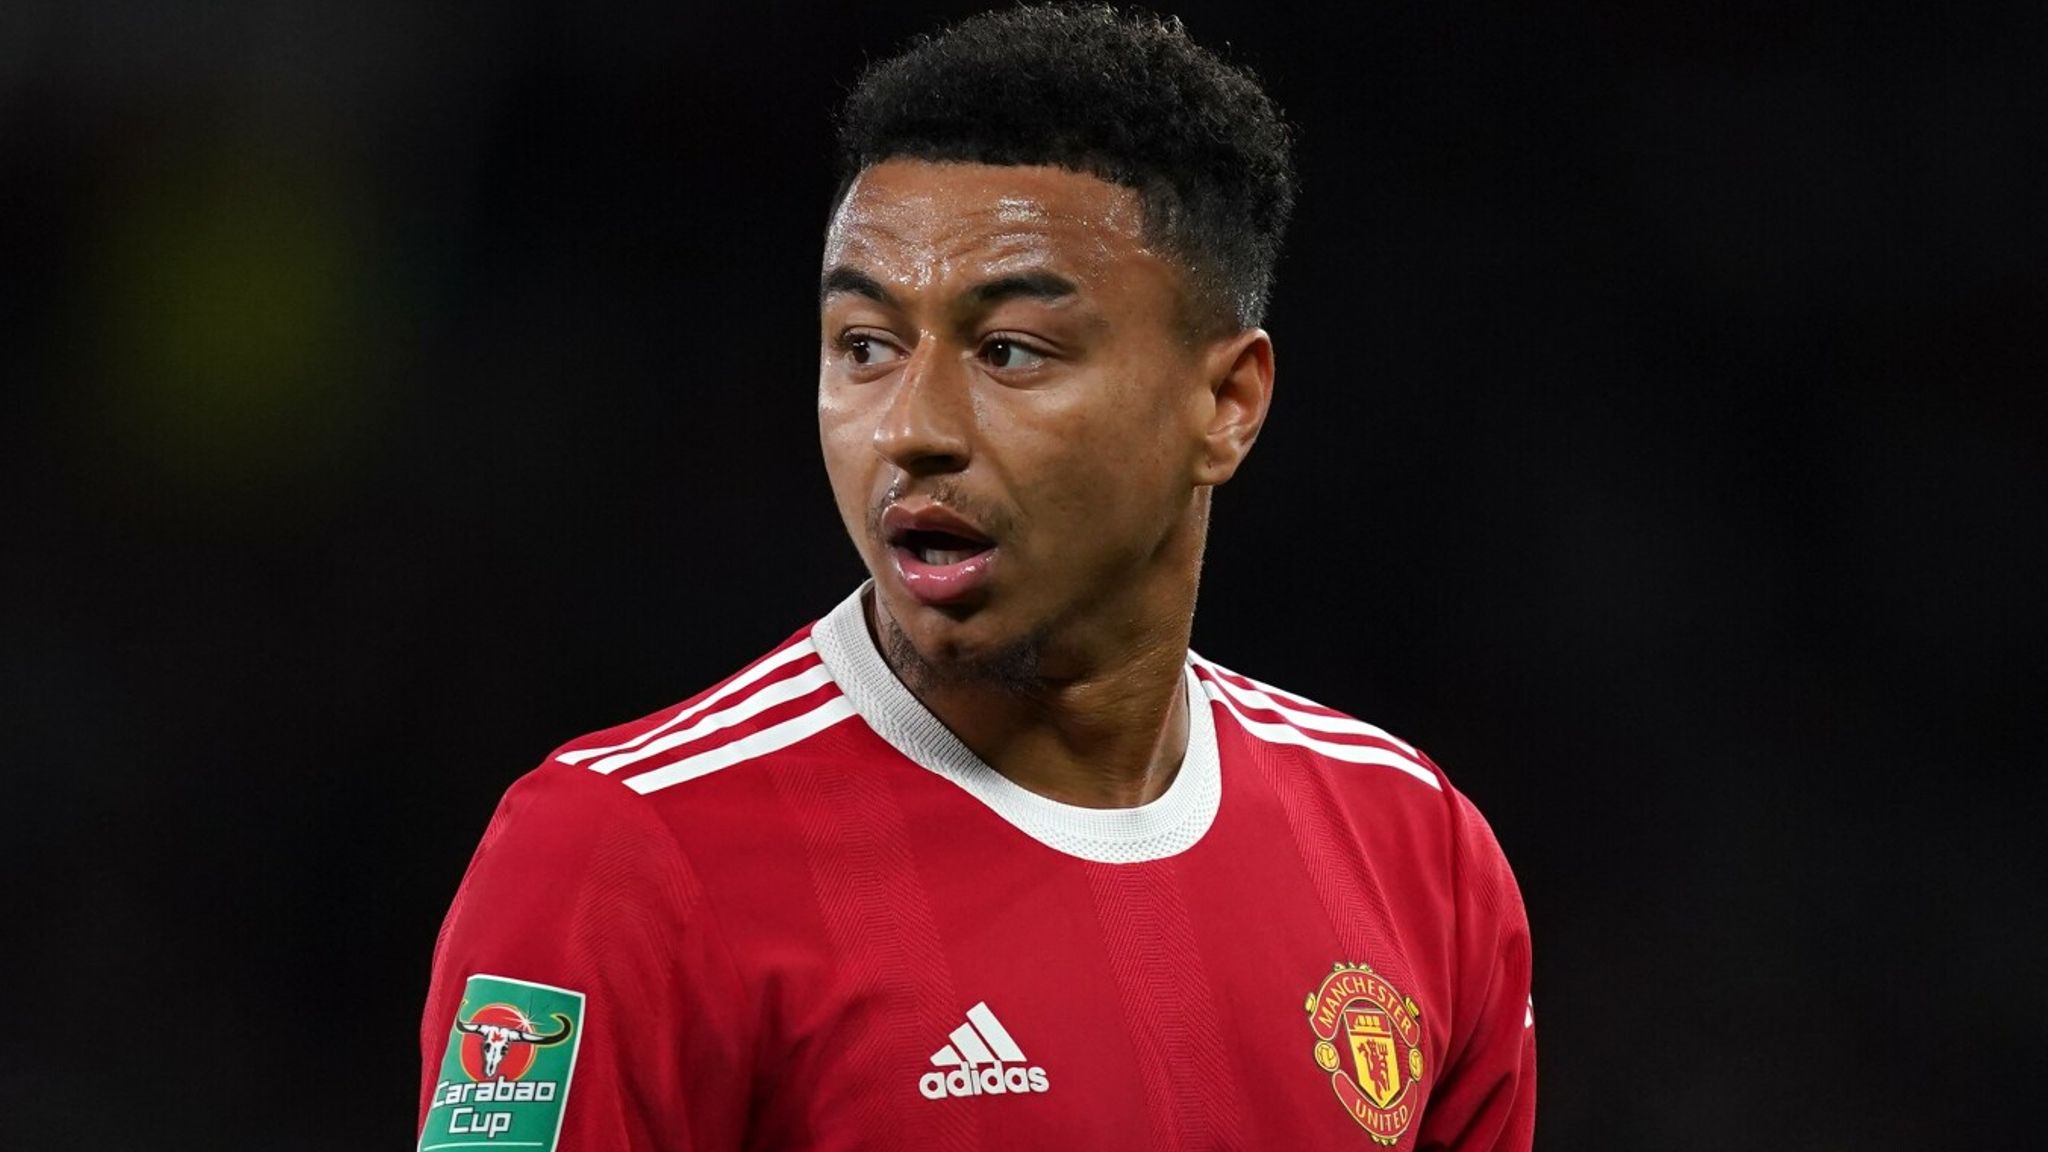 Transfer Talk: With Jesse Lingard&#39;s Man Utd opportunities limited, could Newcastle be perfect fit? | Transfer Centre News | Sky Sports